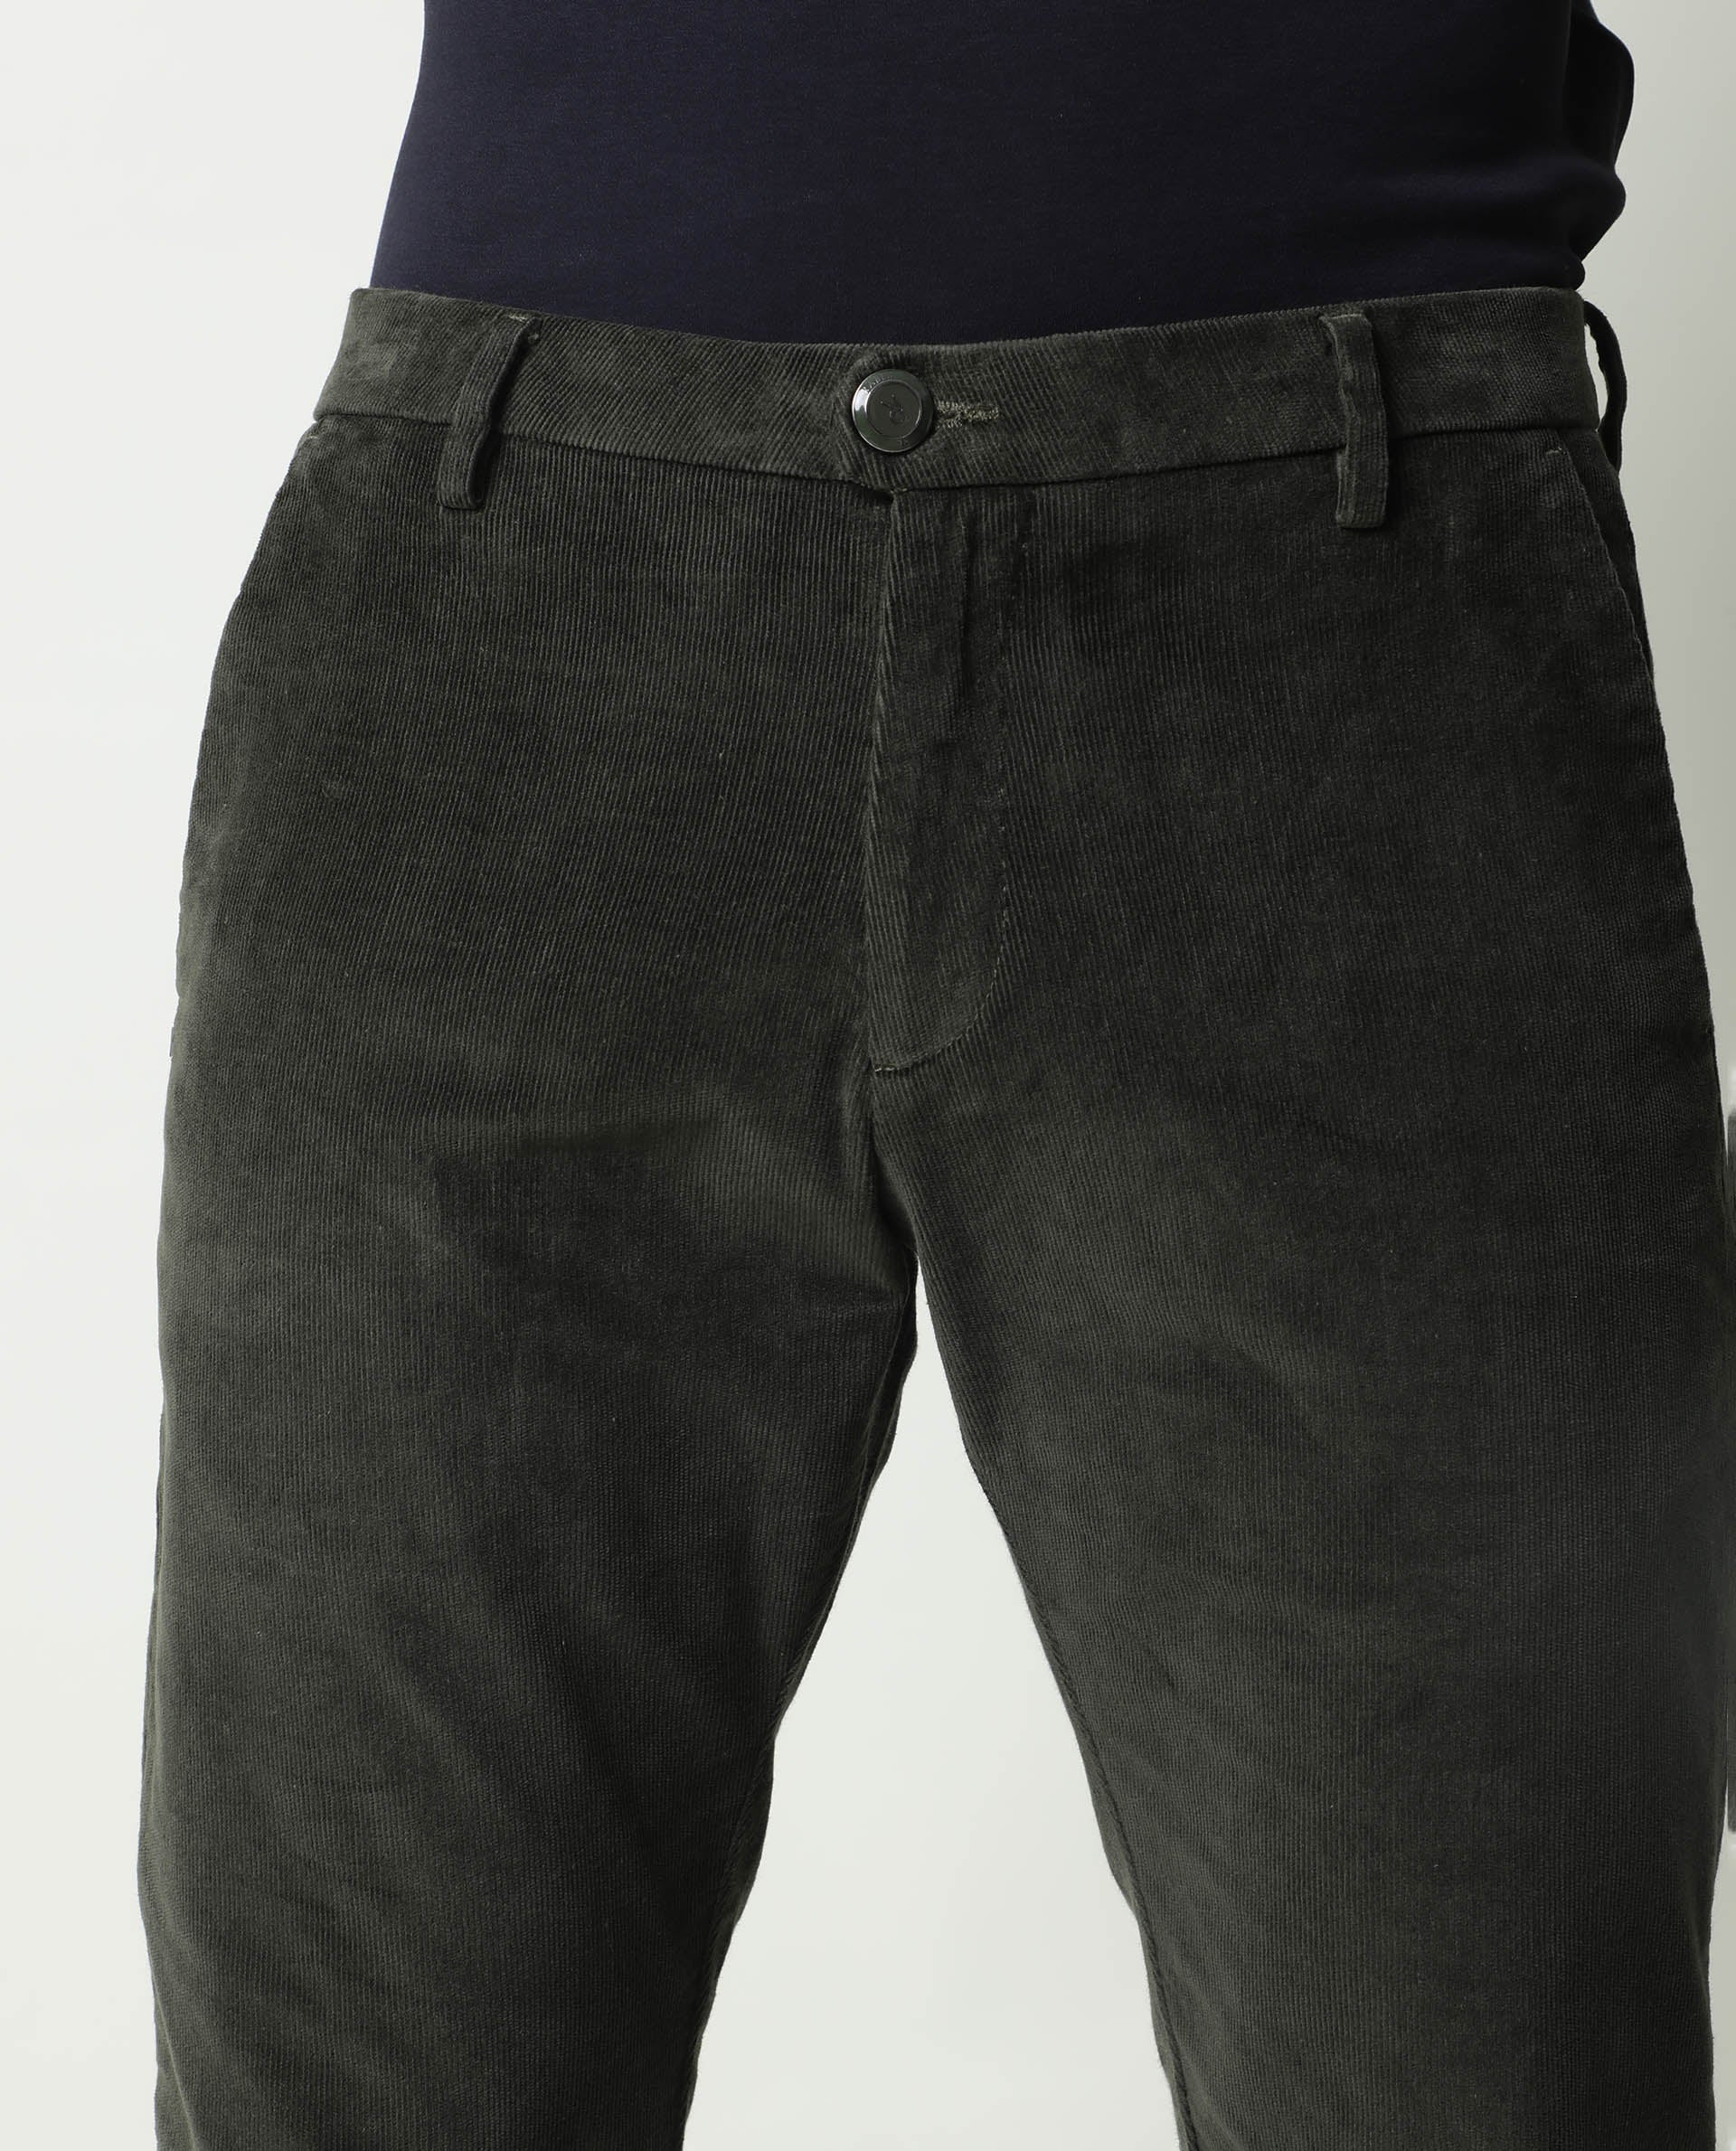 Mens Cord Trousers  Corduroy Trousers for Men  Next